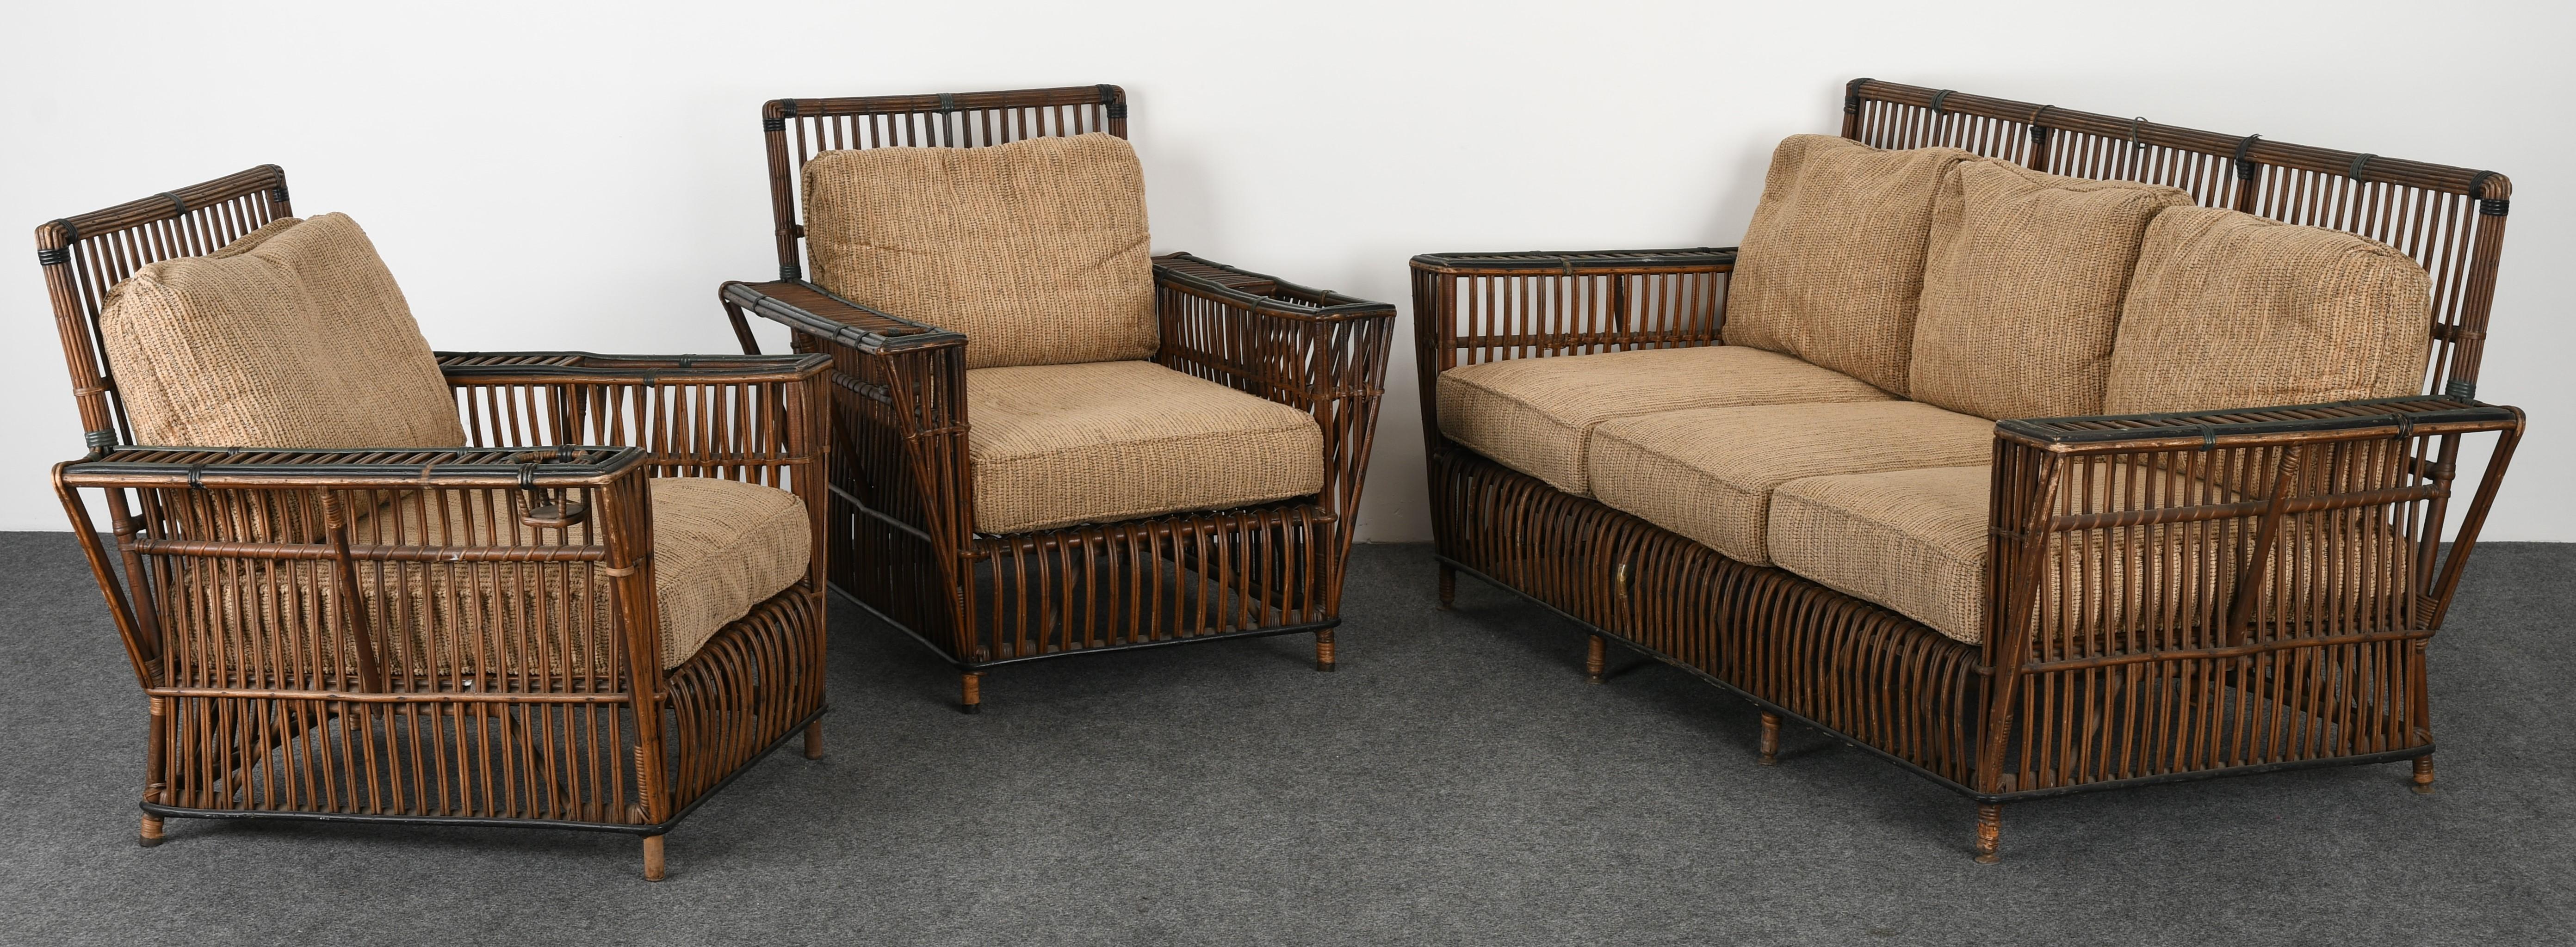 Antique Ypsilanti Stick Reed or Wicker Set in the original untouched finish. Some wear as shown in images, but not distracting. New upholstery is recommended.

Dimensions: 
Sofa 33.5